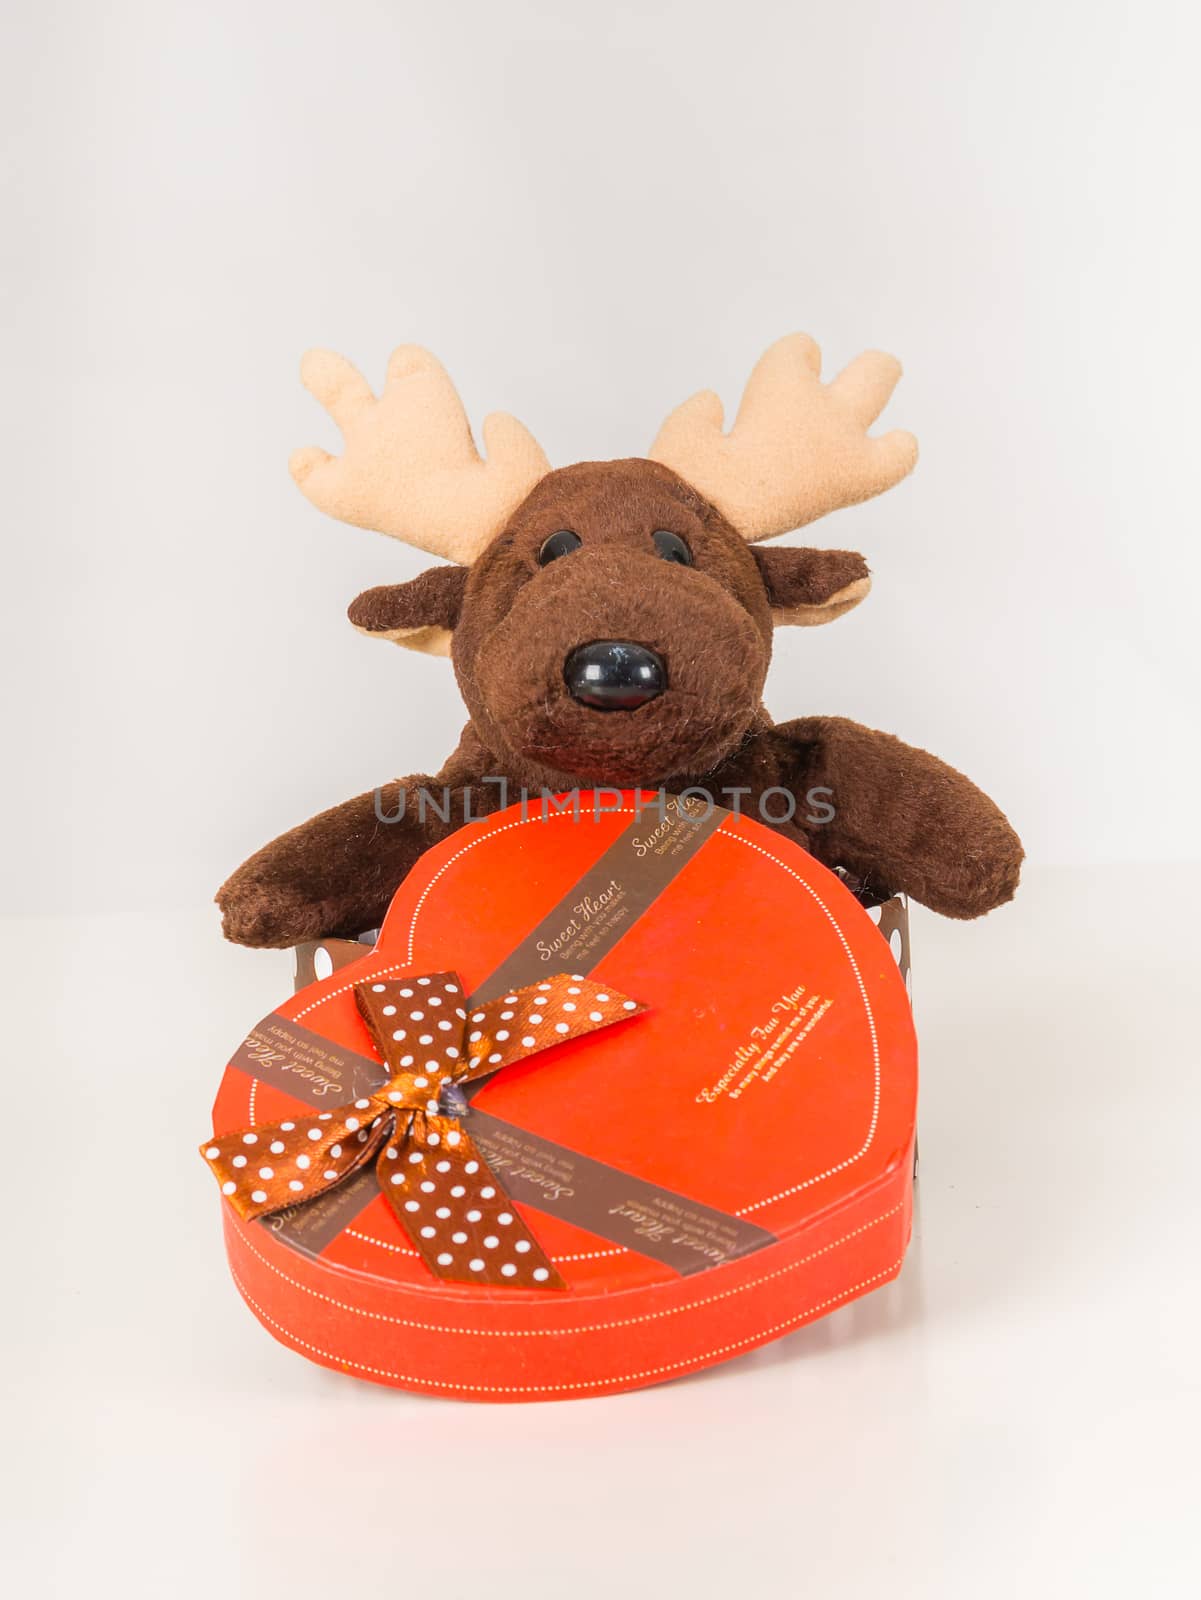 Deer doll and heart-shaped gift box on white background.